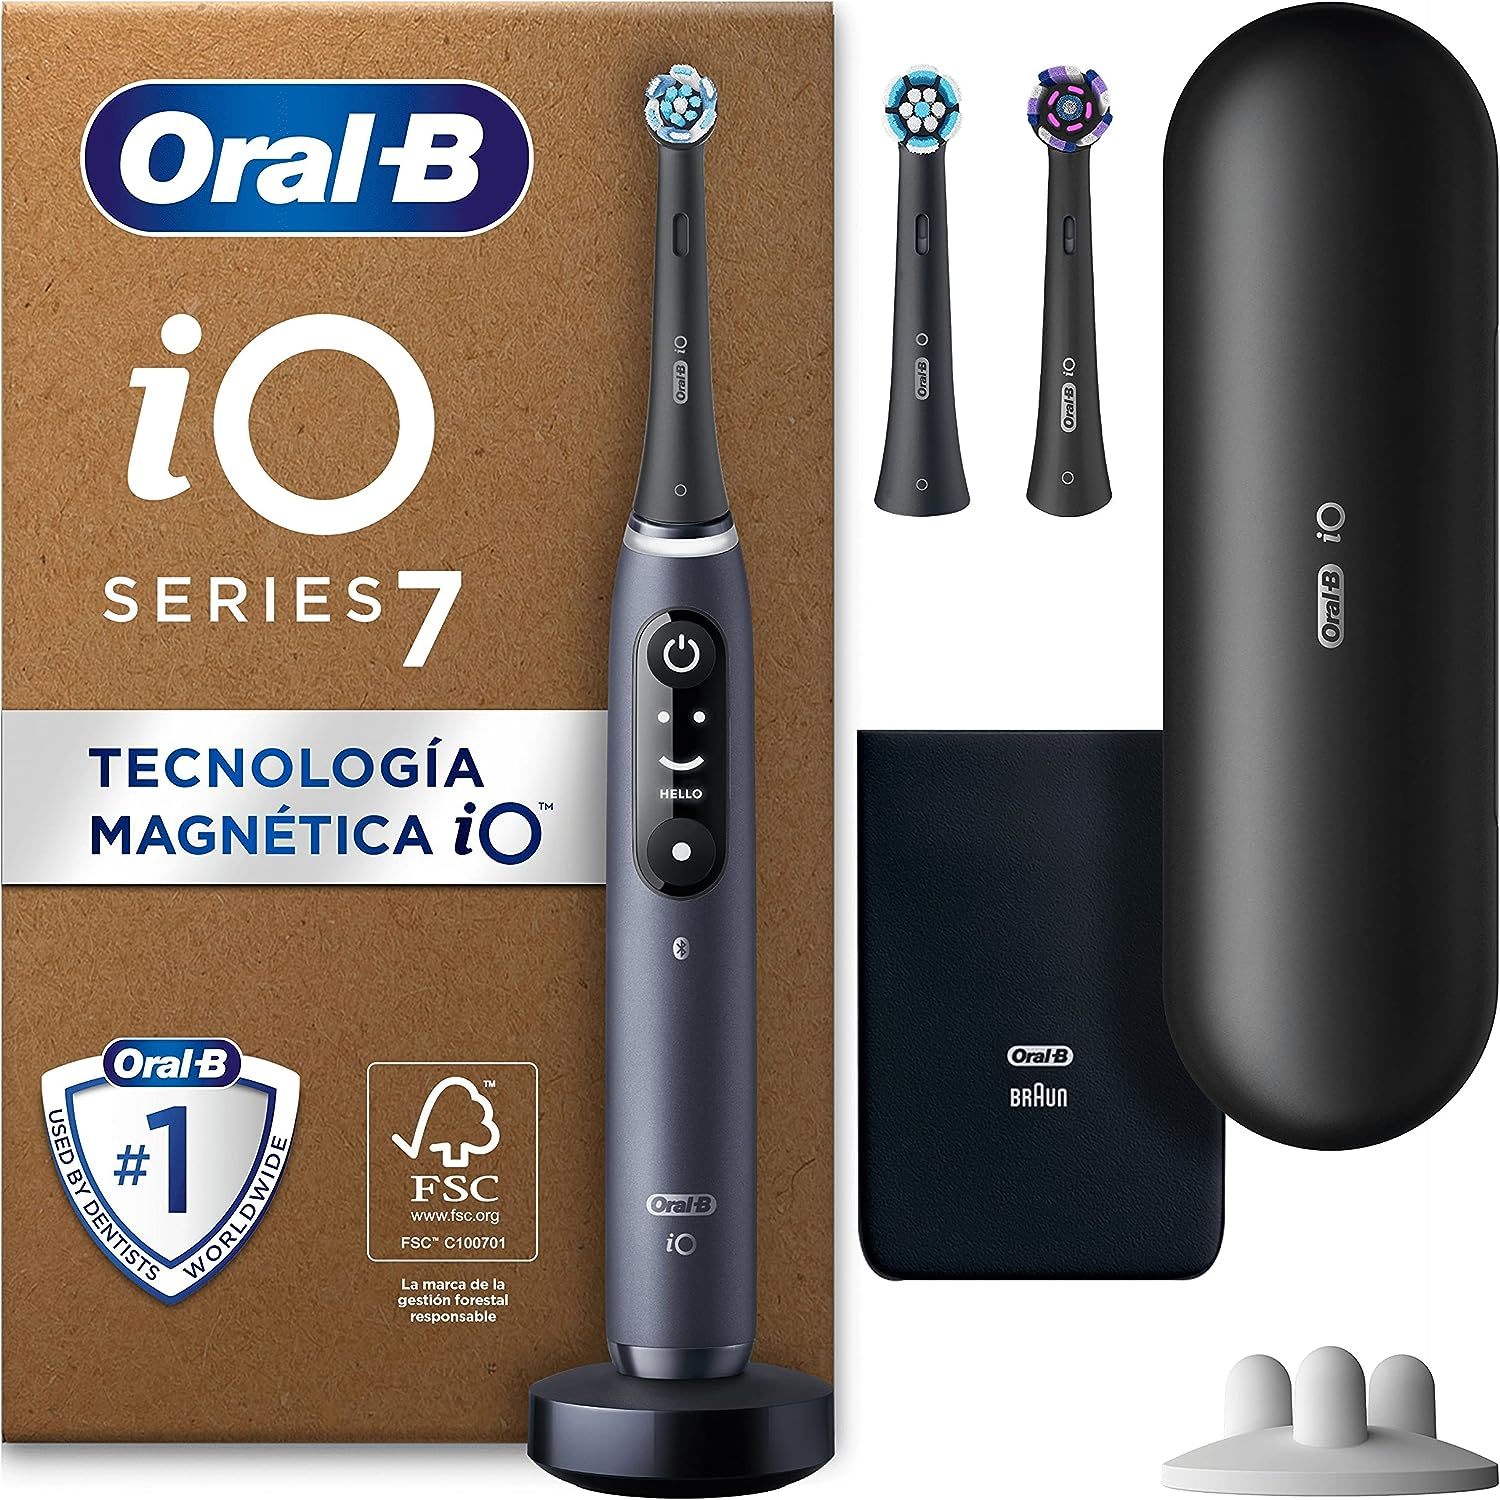 Primary image for Oral-B iO 7N Electric Toothbrush with Rechargeable Handle, 3 Heads - Black